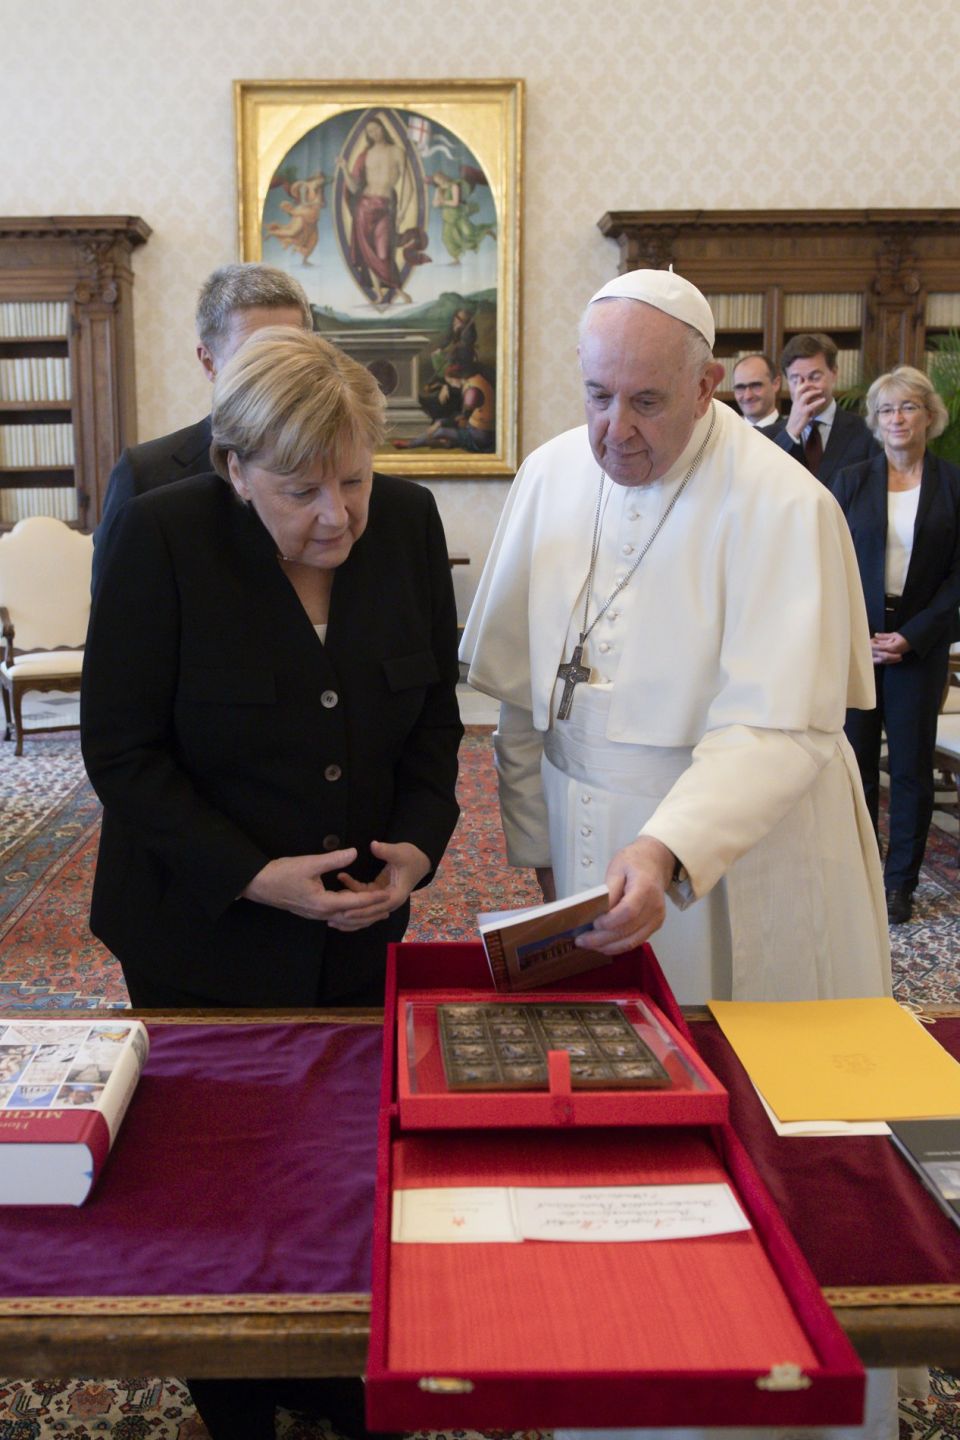 Pope Francis and German Chancellor Angela Merkel exchange gifts during a private meeting at the Vatican Oct. 7, 2021. (CNS photo/Vatican Media)